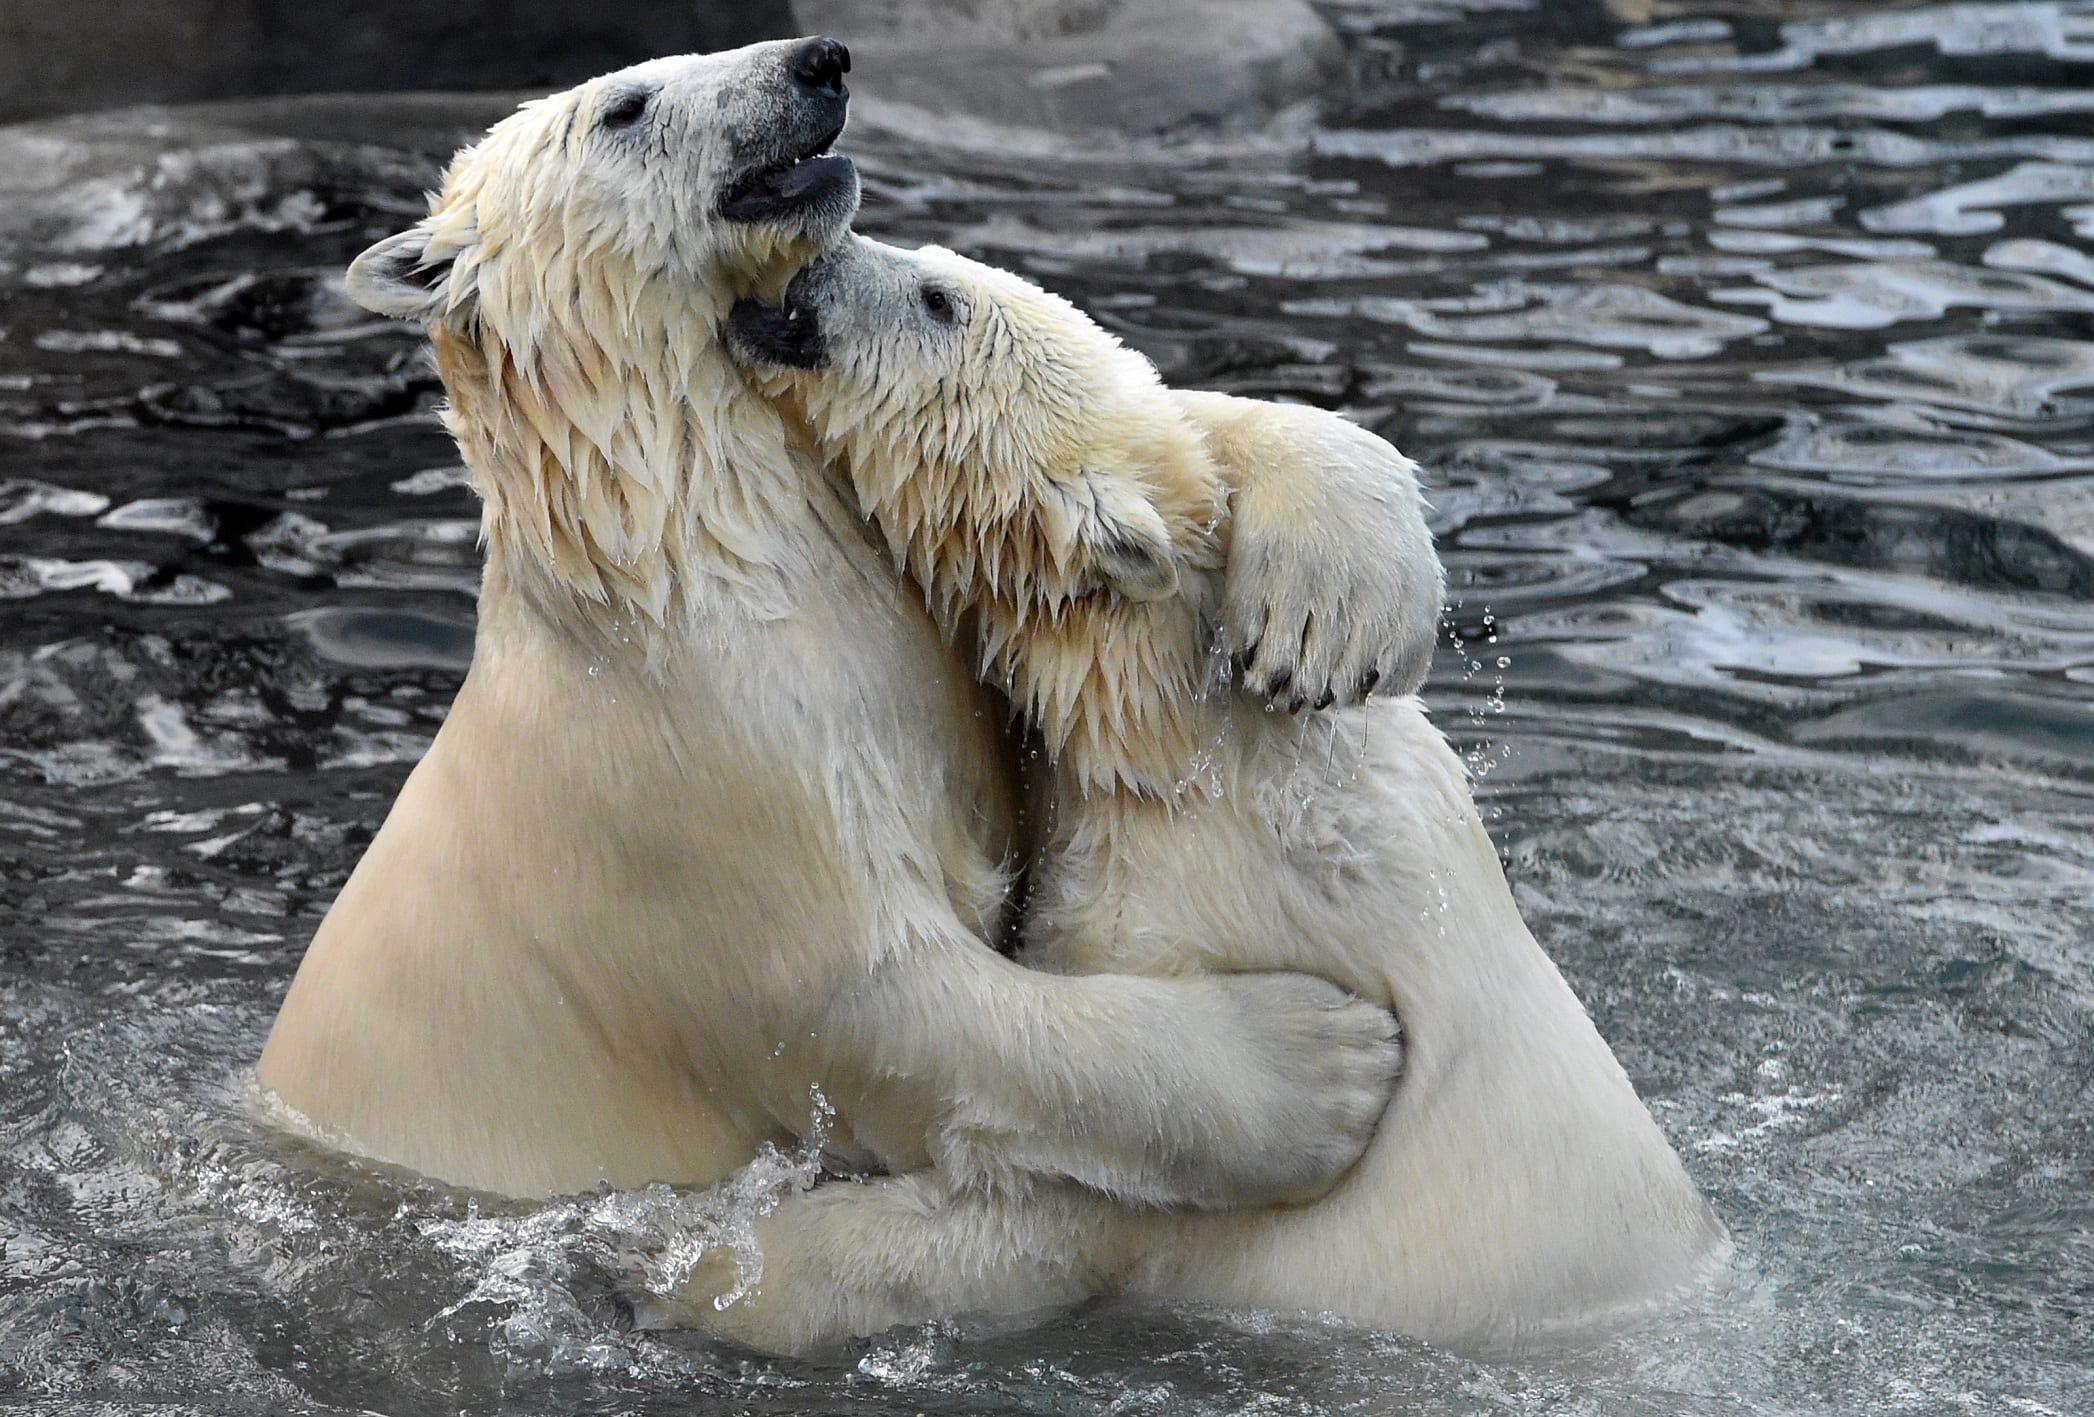 Two polar bears play in the water in their enclosure at Moscow's zoo on December 10, 2015. / AFP / VASILY MAXIMOV        (Photo credit should read VASILY MAXIMOV/AFP via Getty Images)